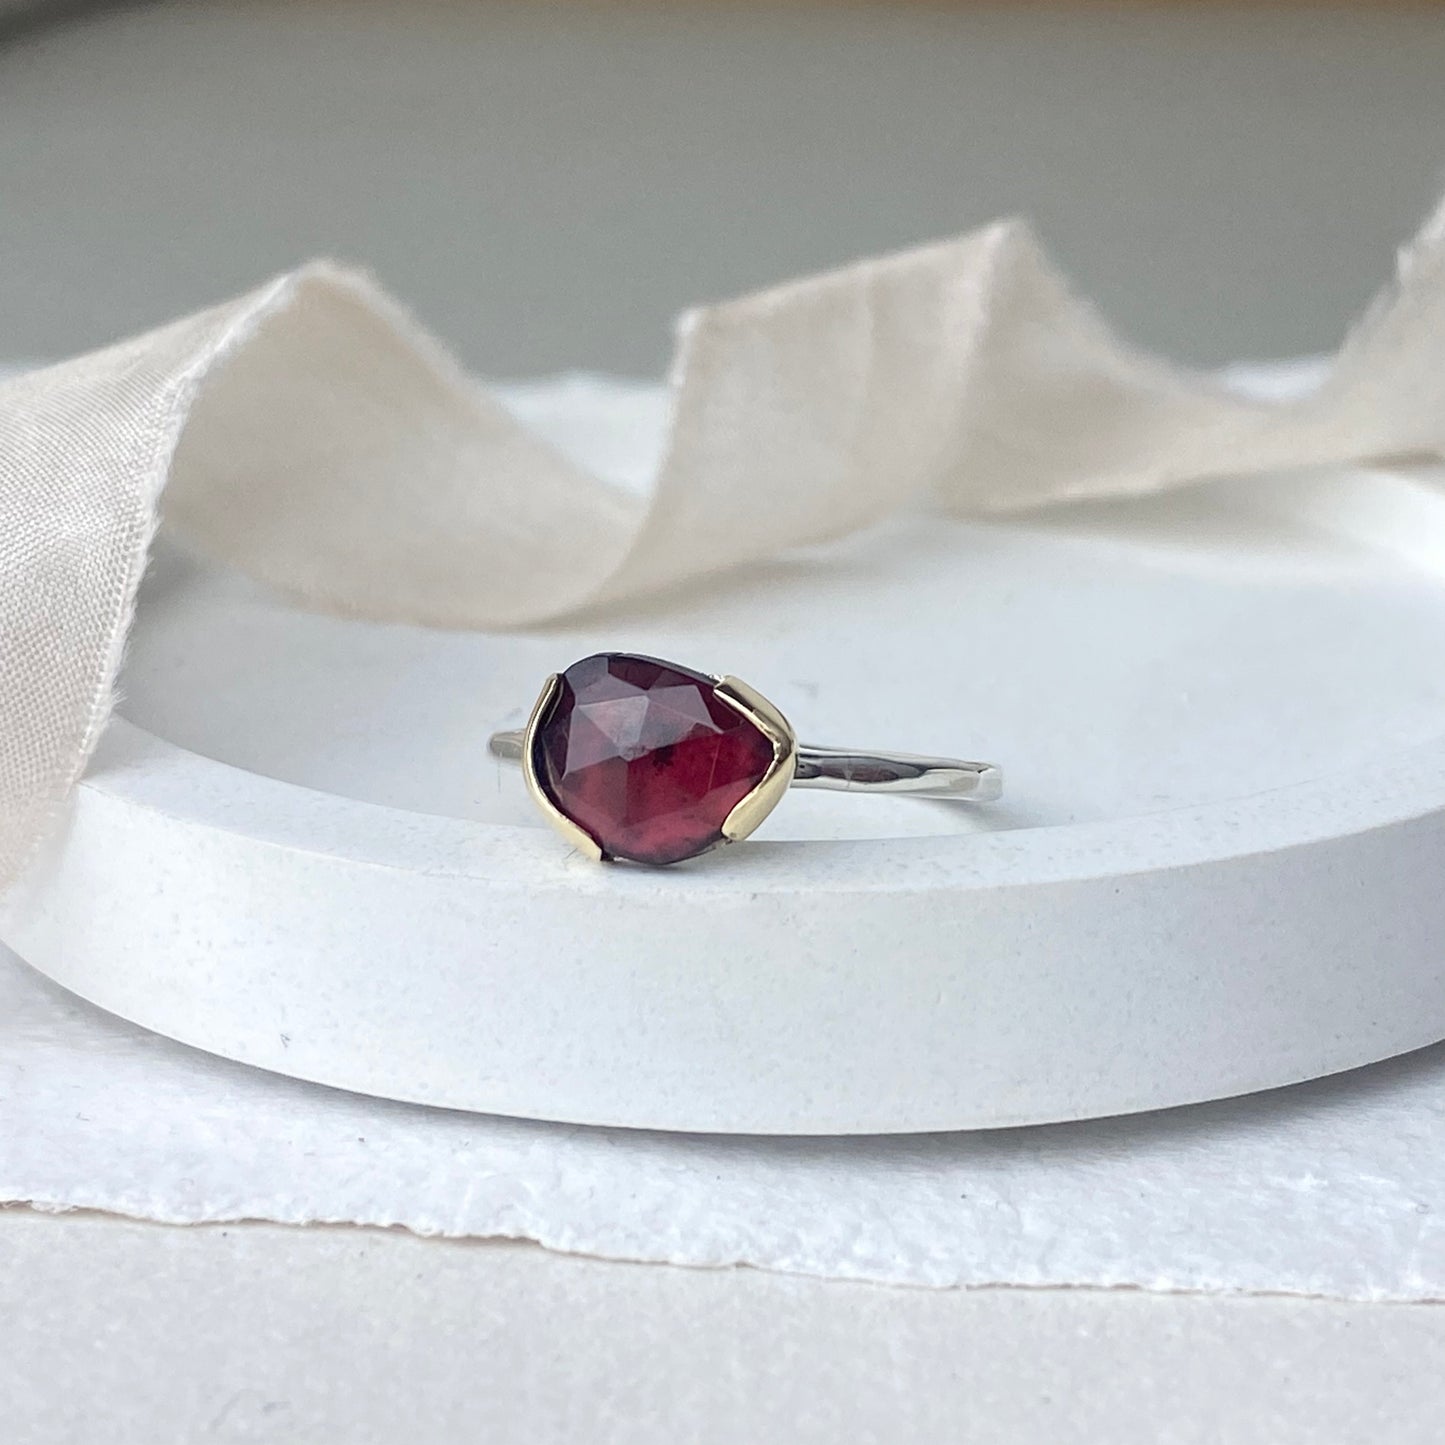 Garnet ring in silver and 9ct gold